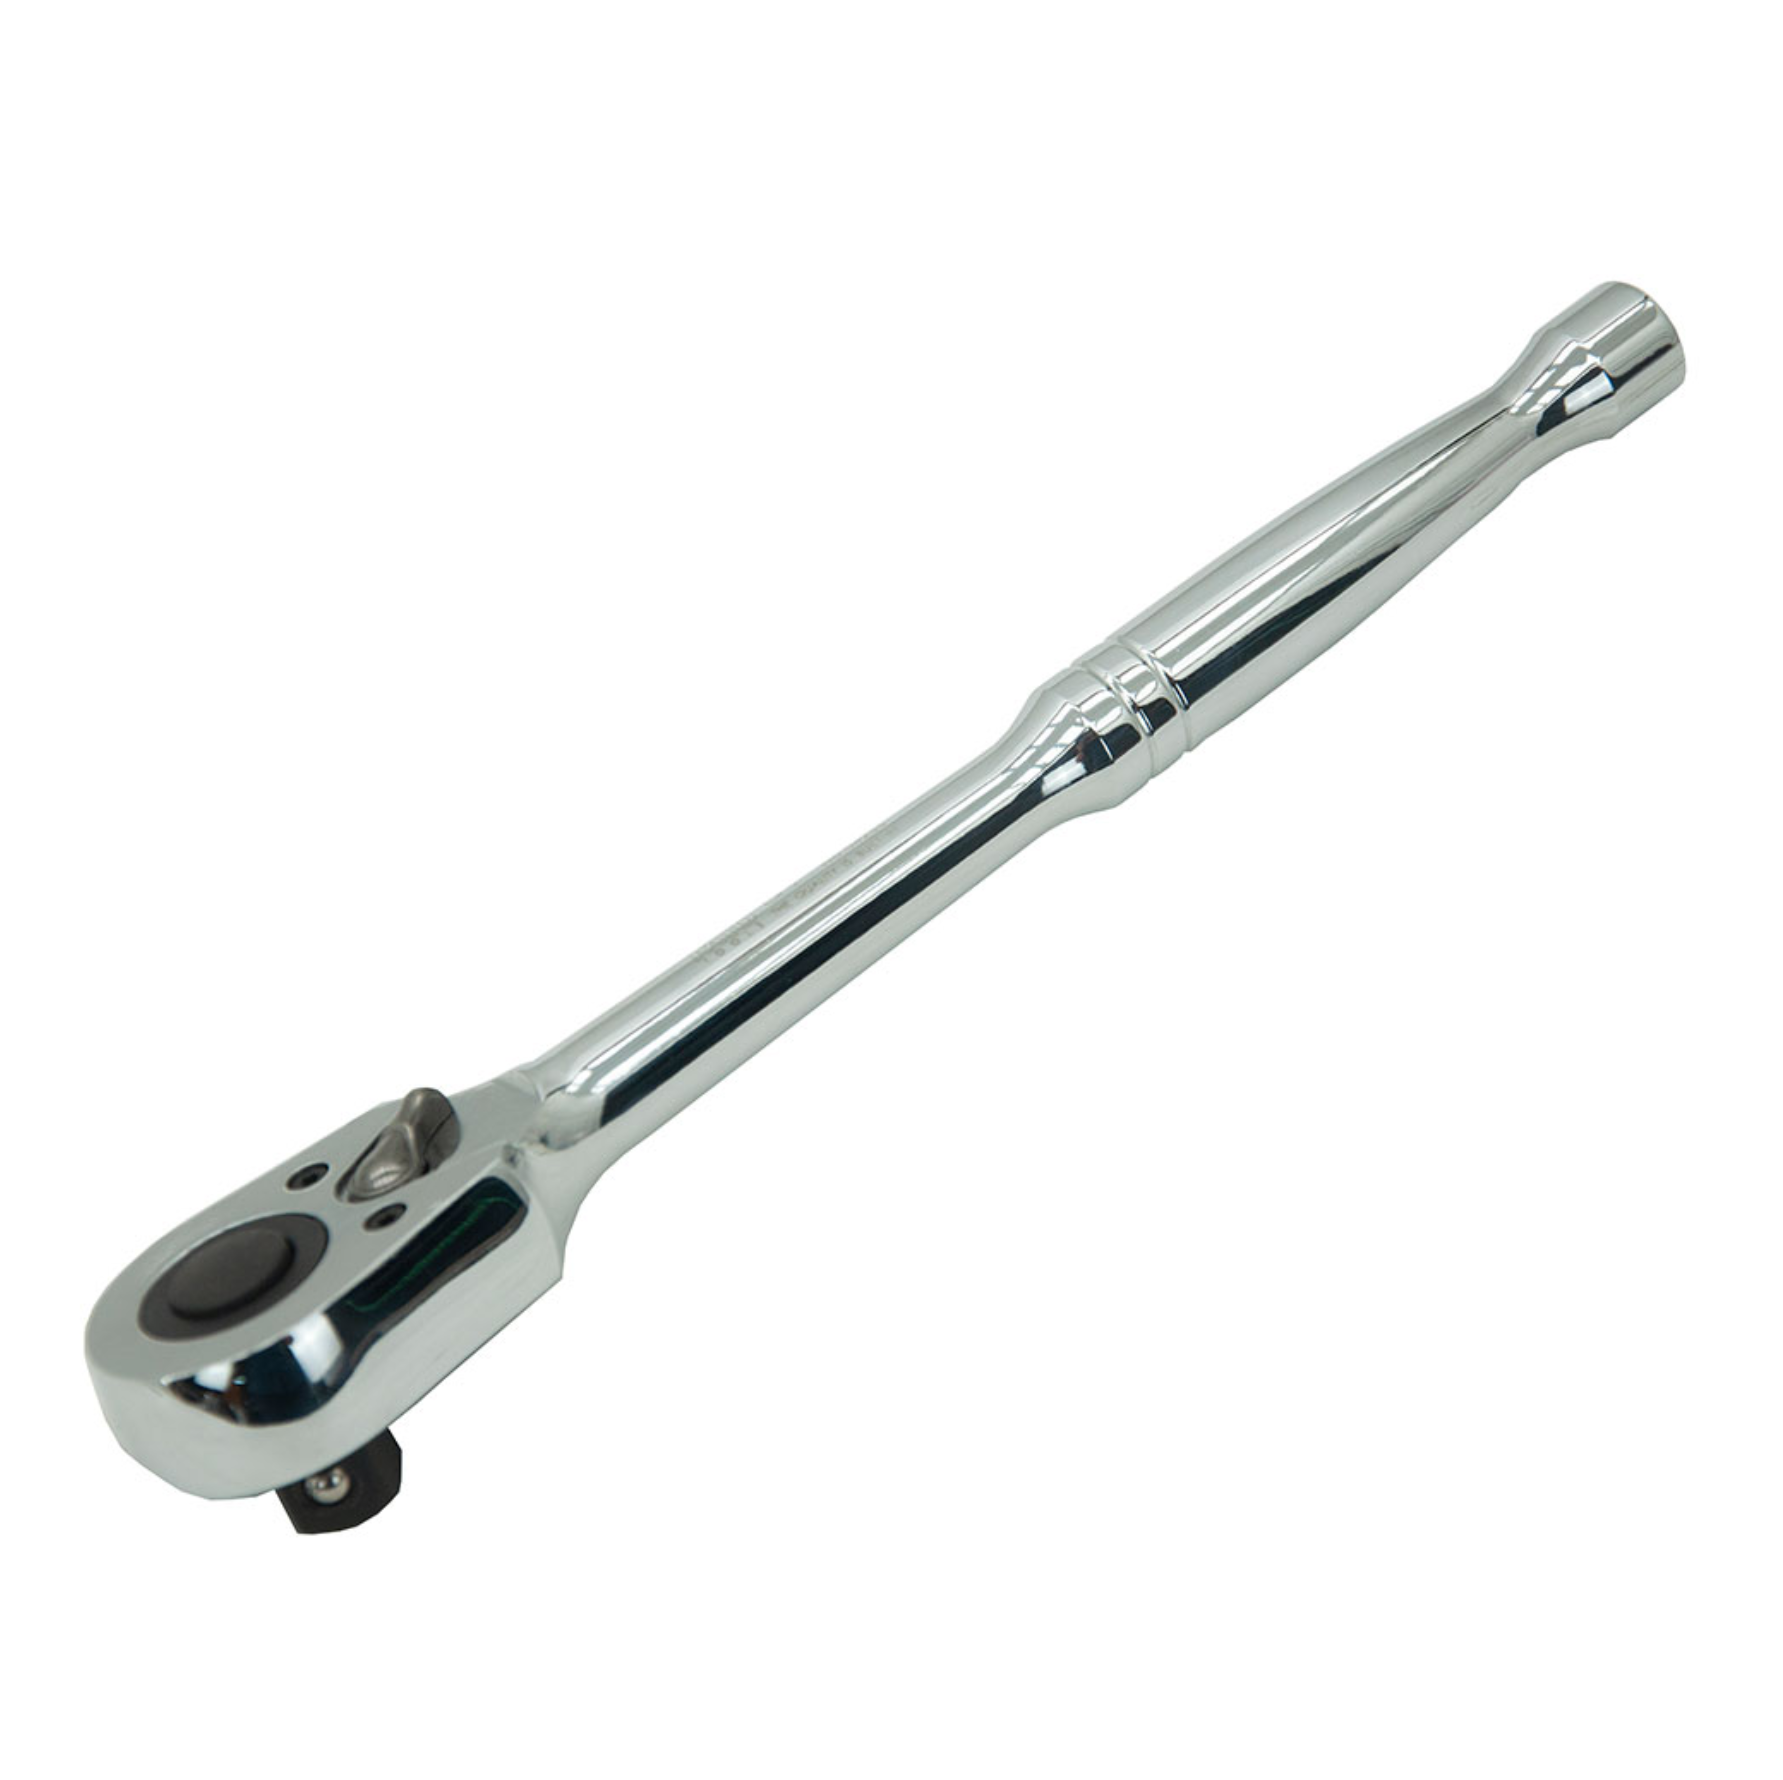 M10 Ratchet Handle With Quick Release